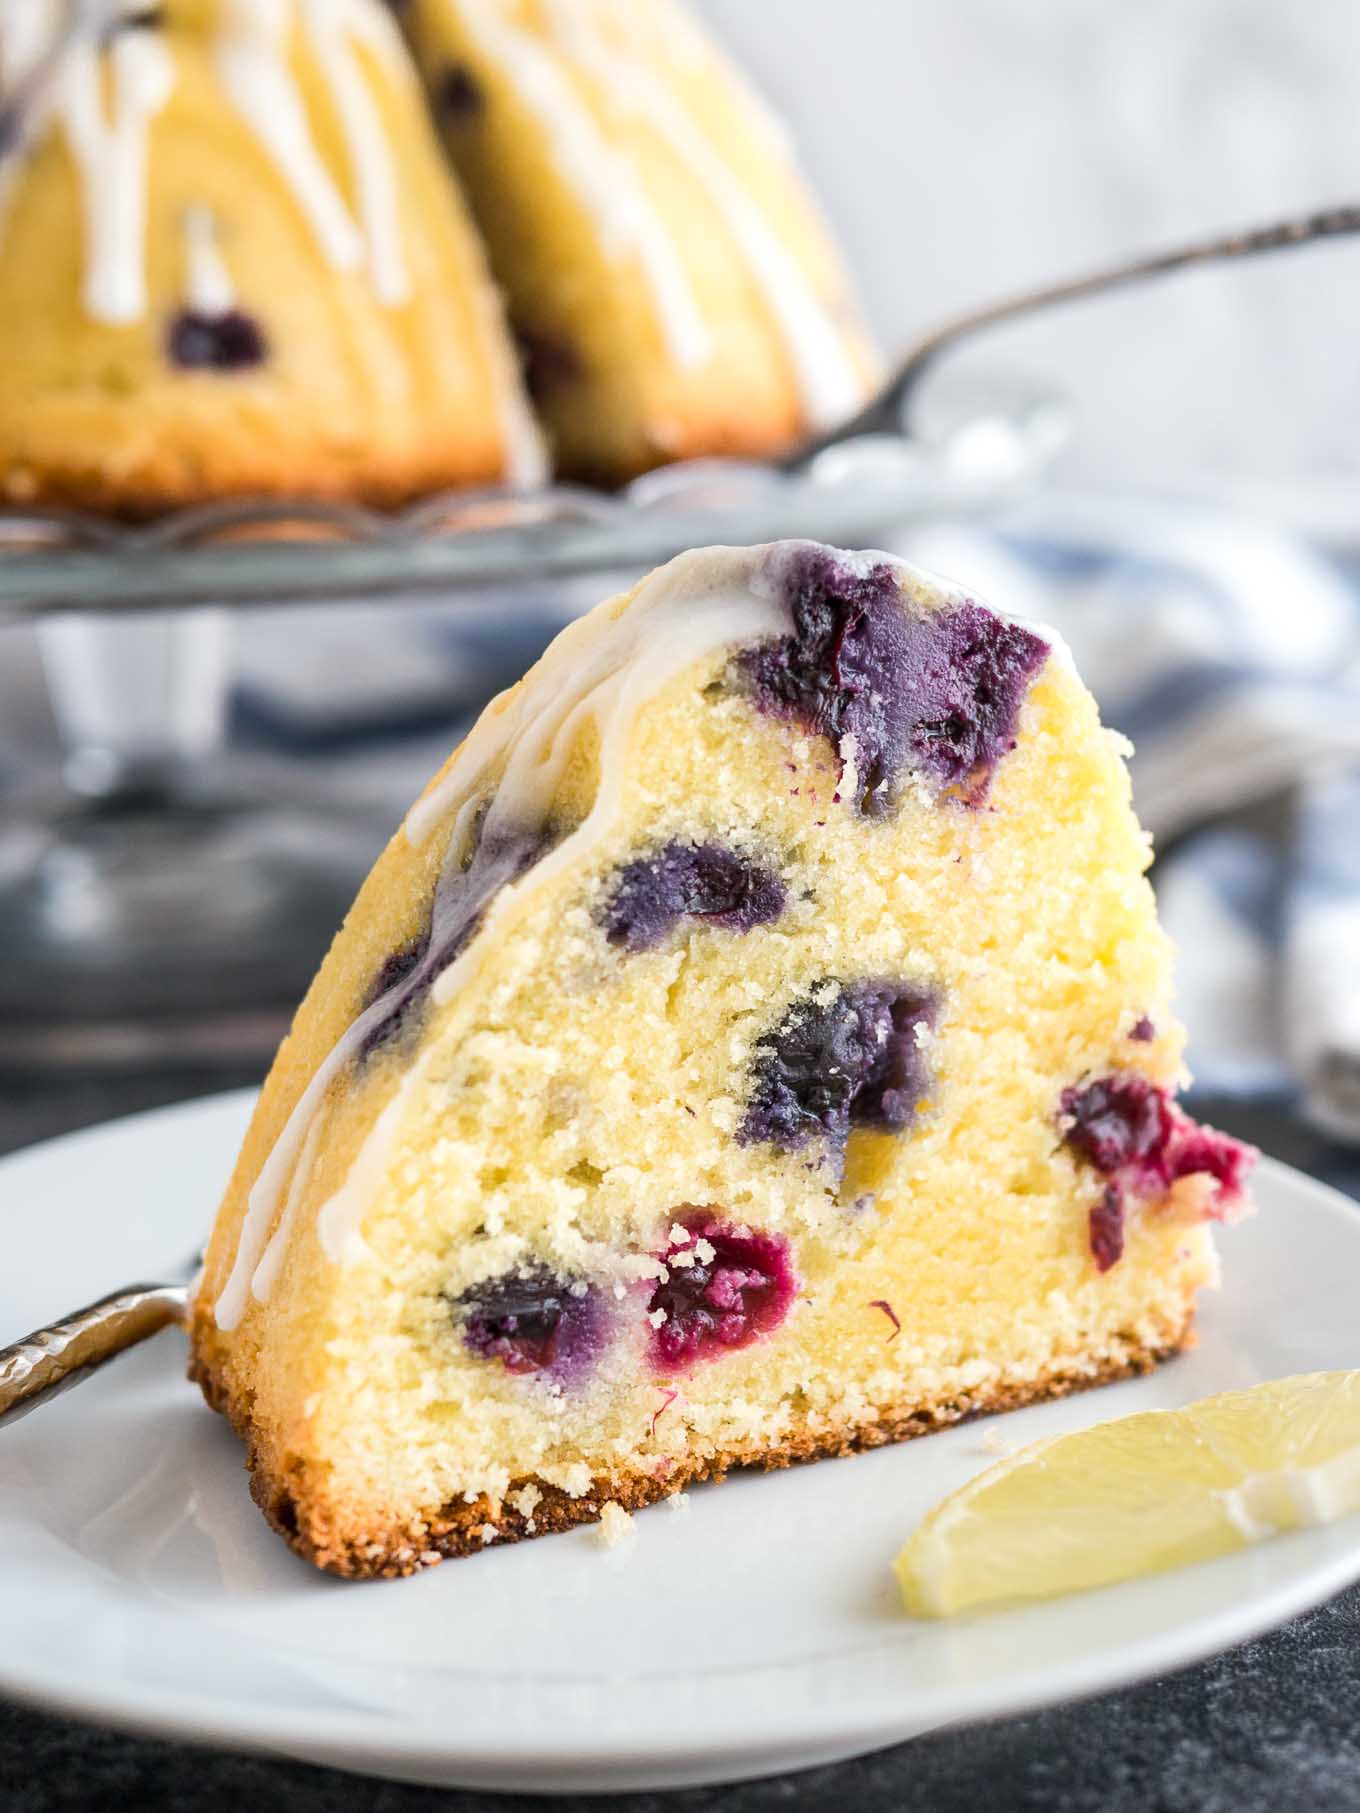 A slice of lemon blueberry bundt cake on a white plate with a fork and a wedge of lemon. The rest of the cake is on a glass serving platter in the background next to a white and blued dishtowel.